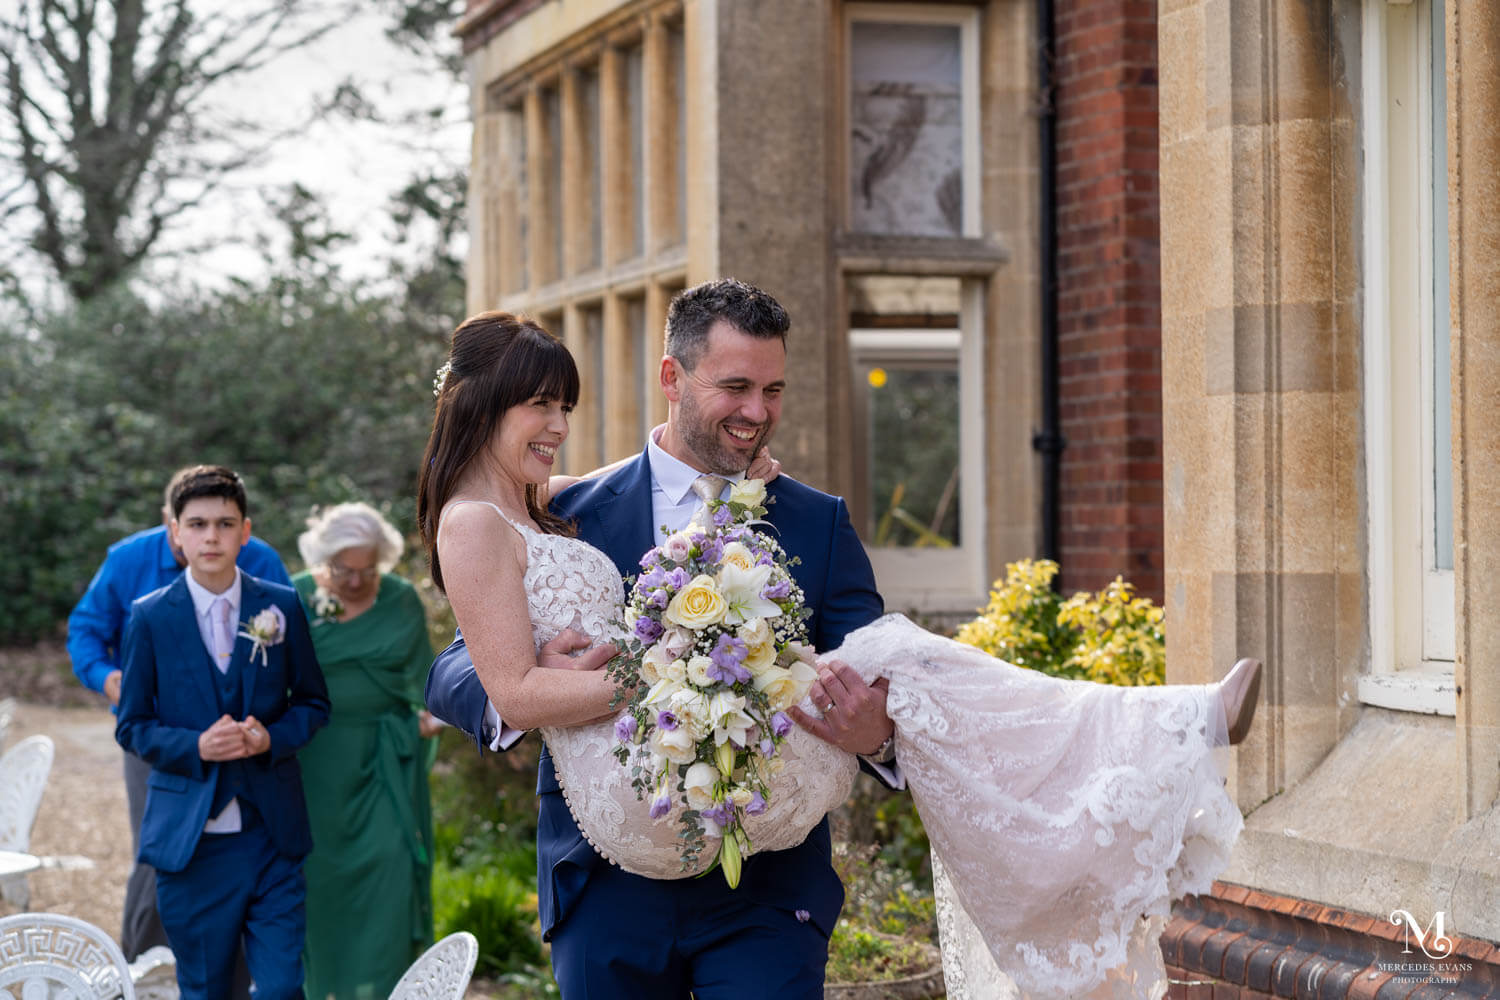 the groom carries his bride, surrounded by wedding guests as they walk in the garden at Cantley house